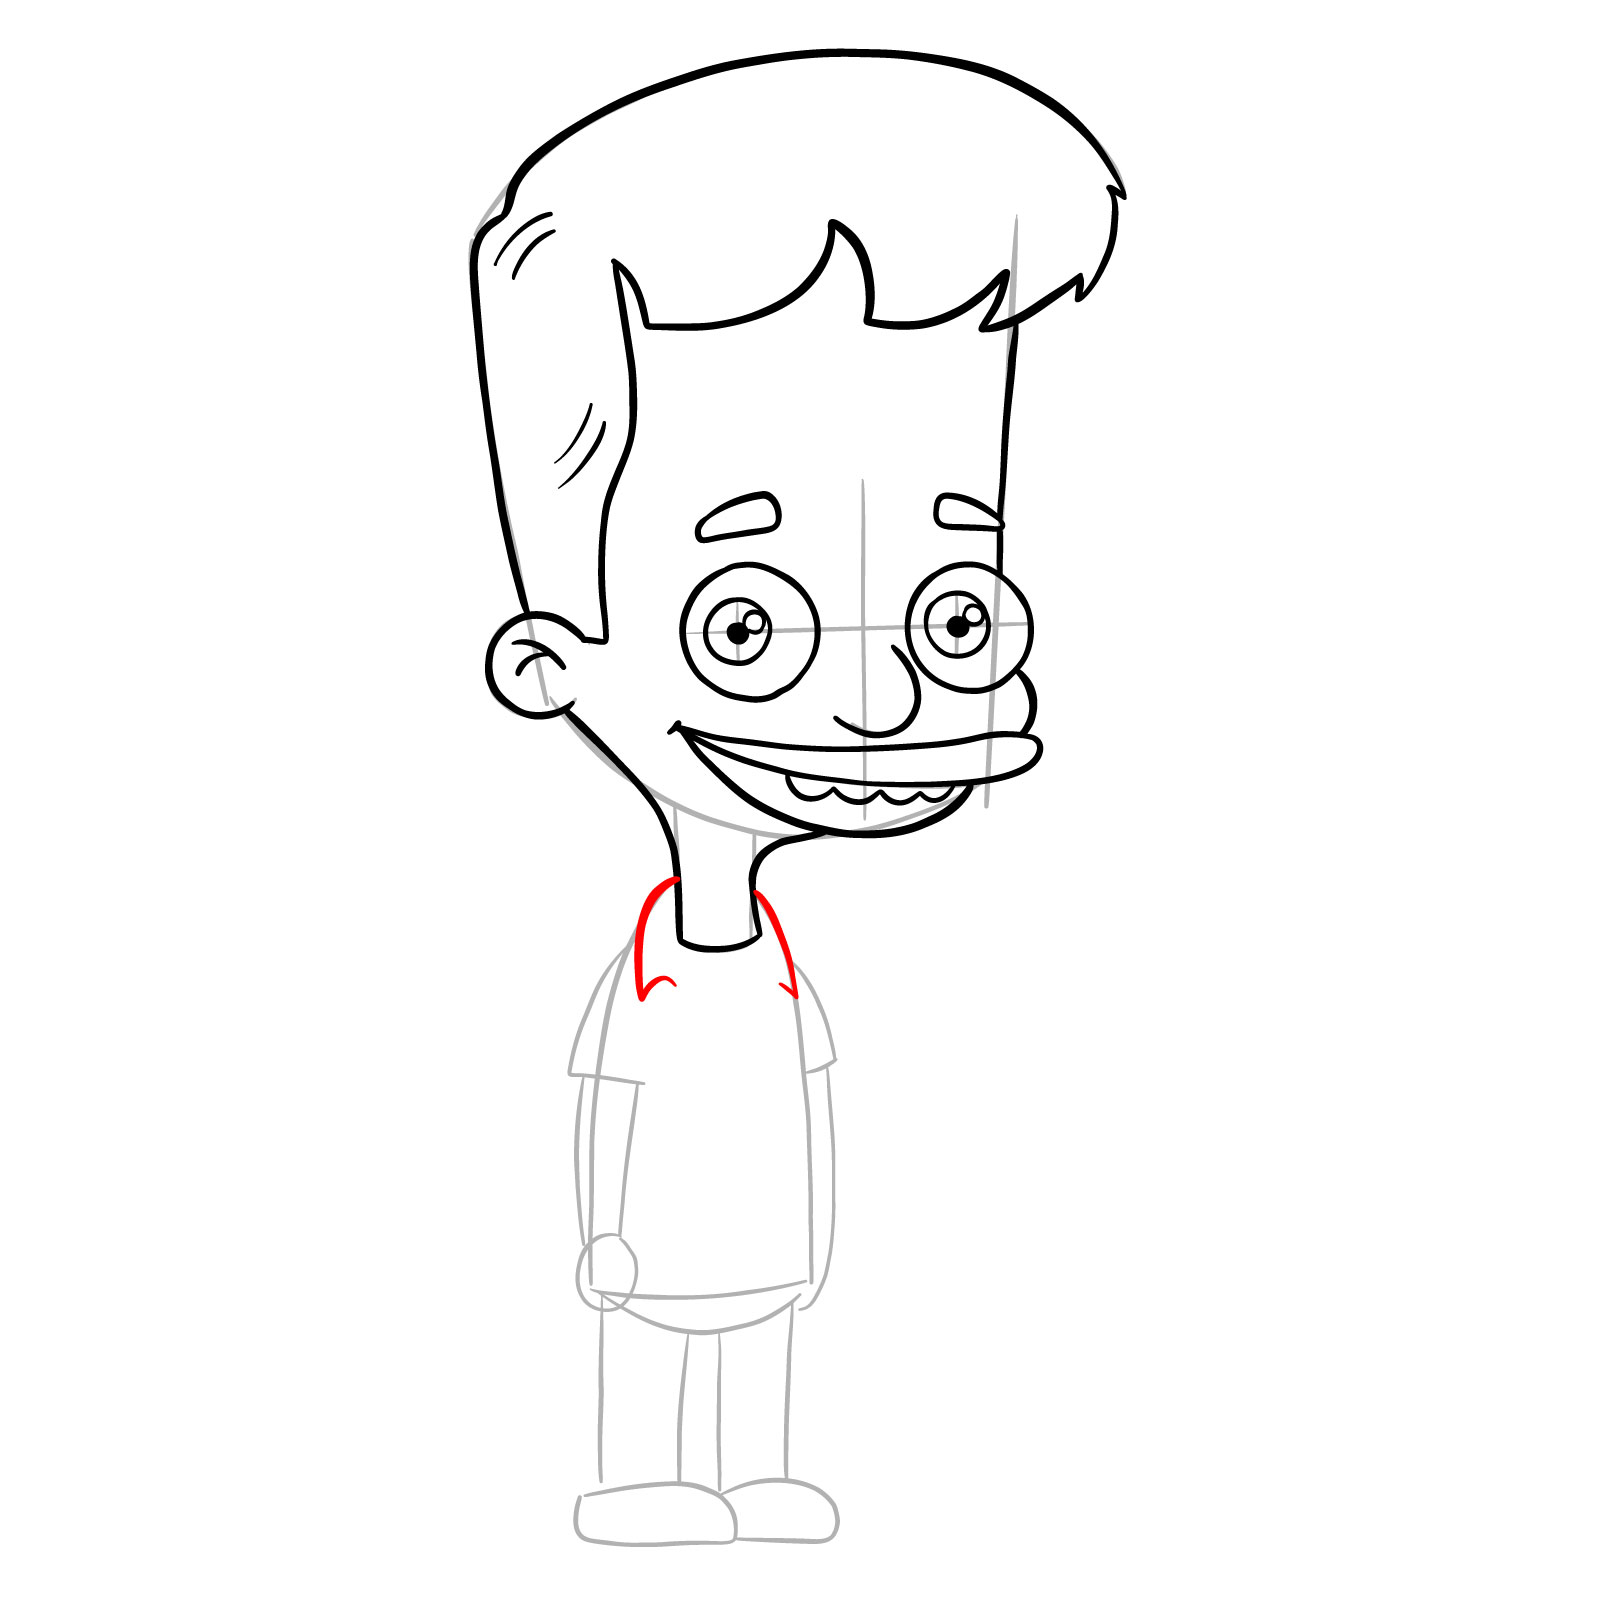 How to draw Nick Birch from Big Mouth - step 15